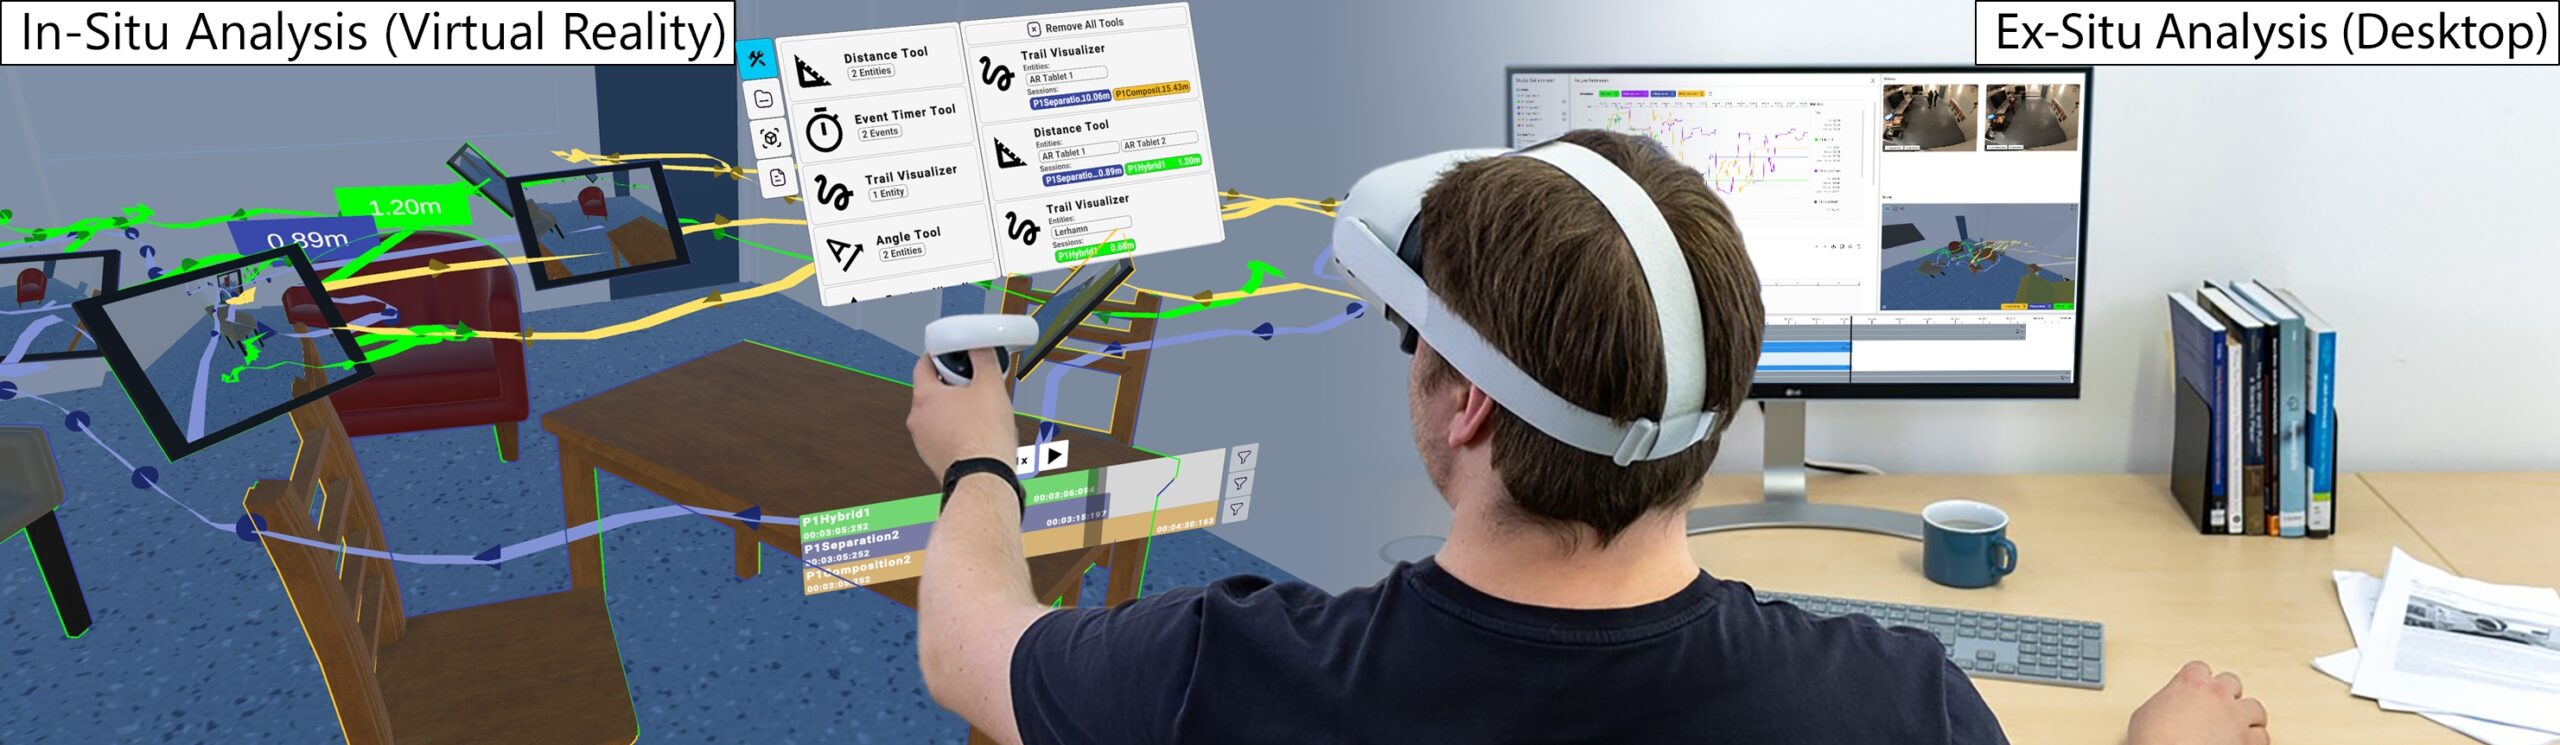 ReLive: Bridging In-Situ and Ex-Situ Visual Analytics for Analyzing Mixed Reality User Studies